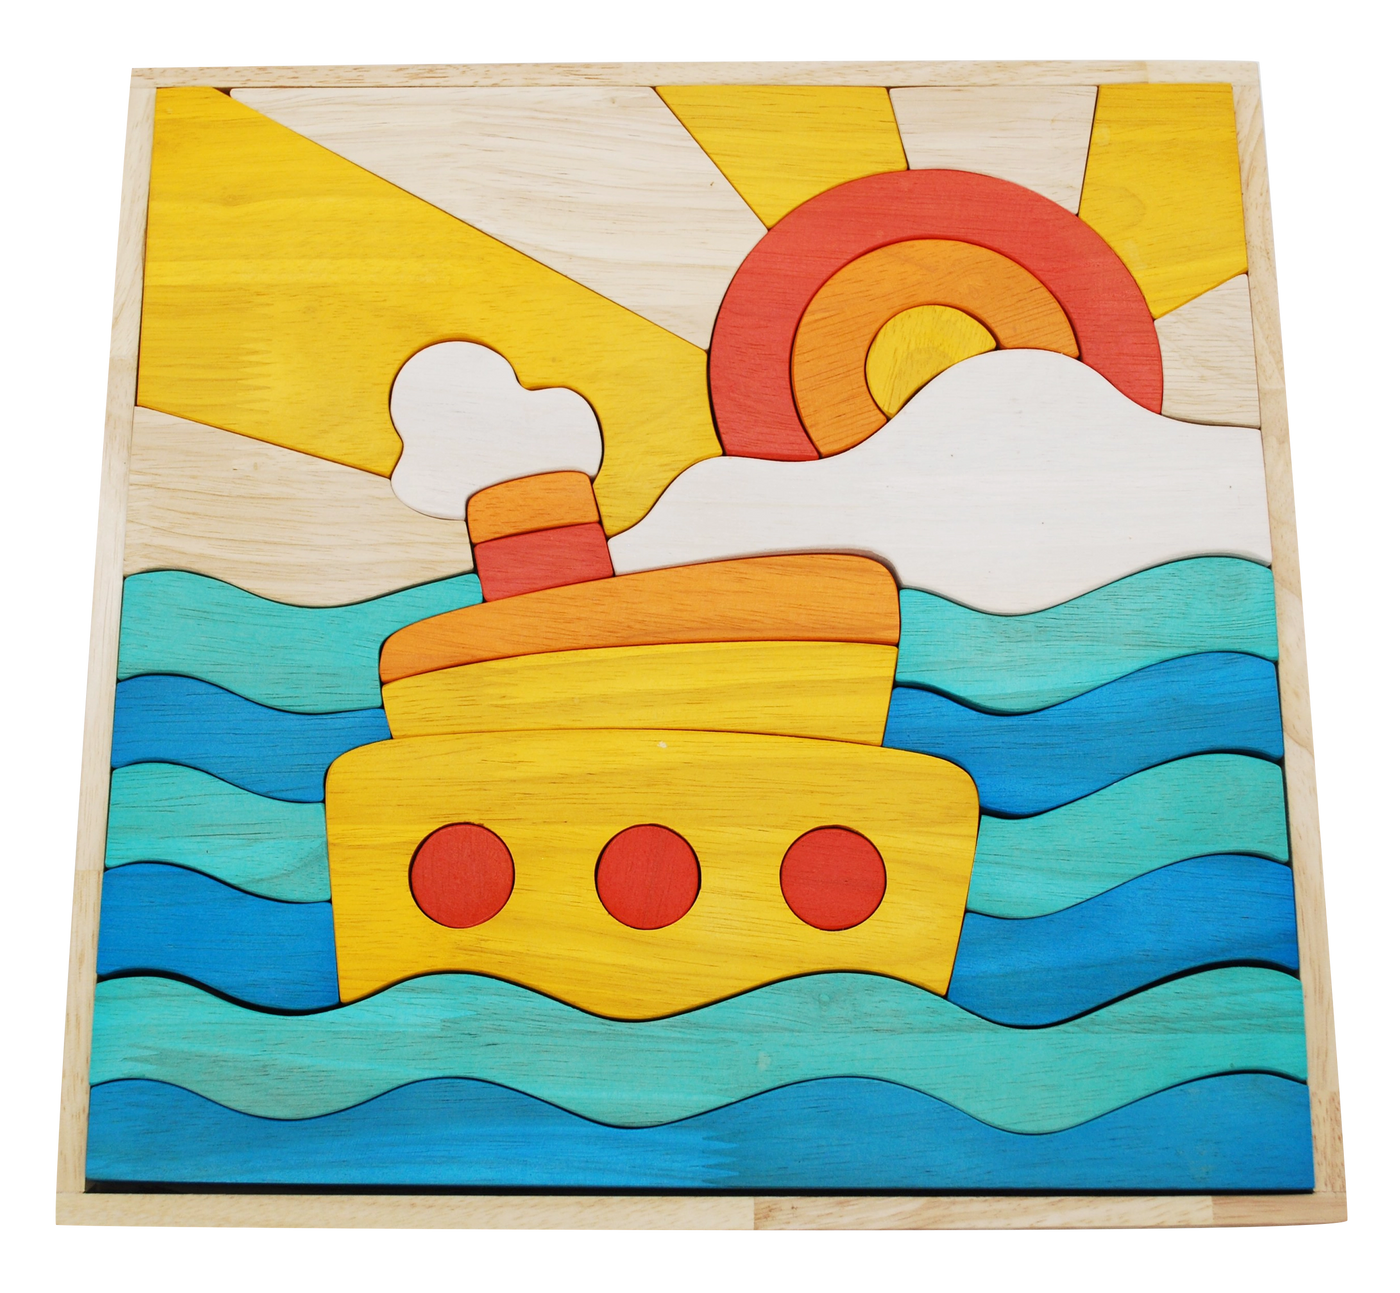 Ocean Scene Puzzle and Play Set